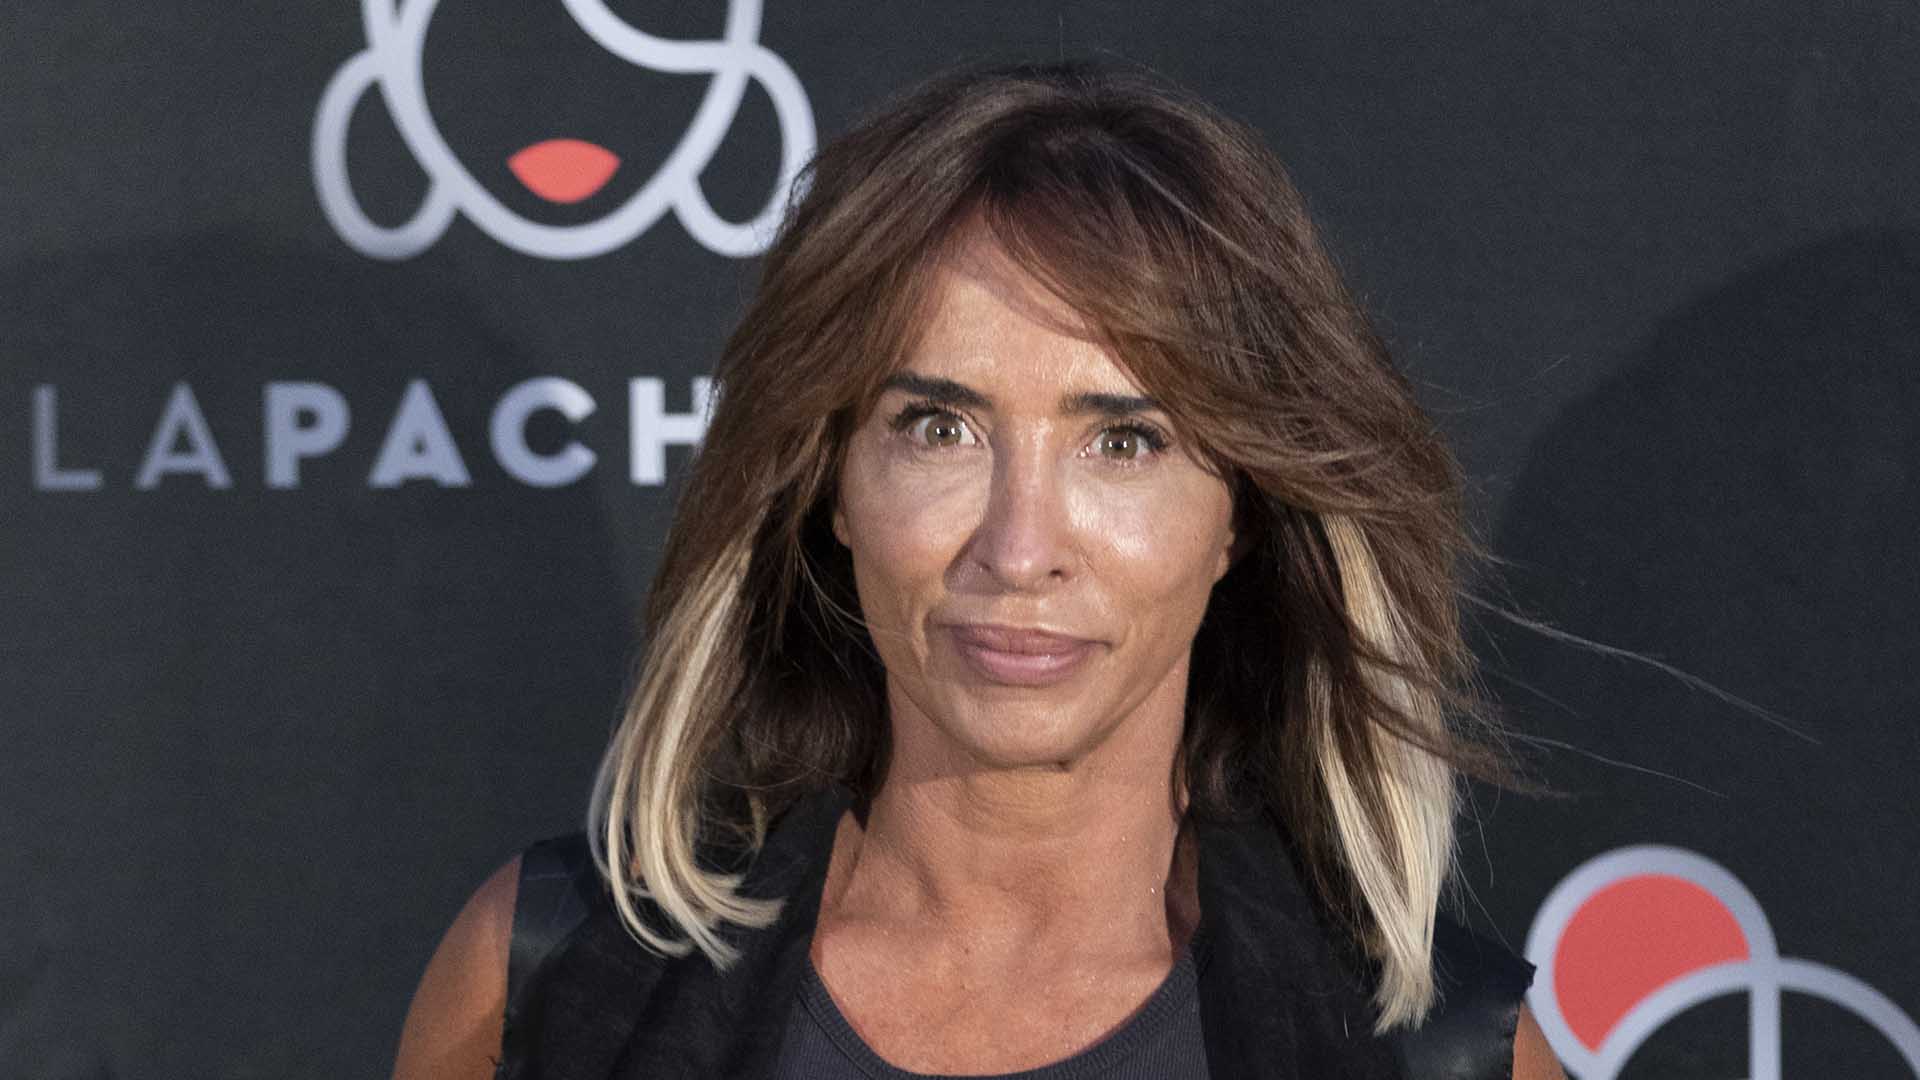 Journalist Maria PatiÃ±o at photocall of presentation La Pacheca Show in Madrid on Friday, 10 September 2021